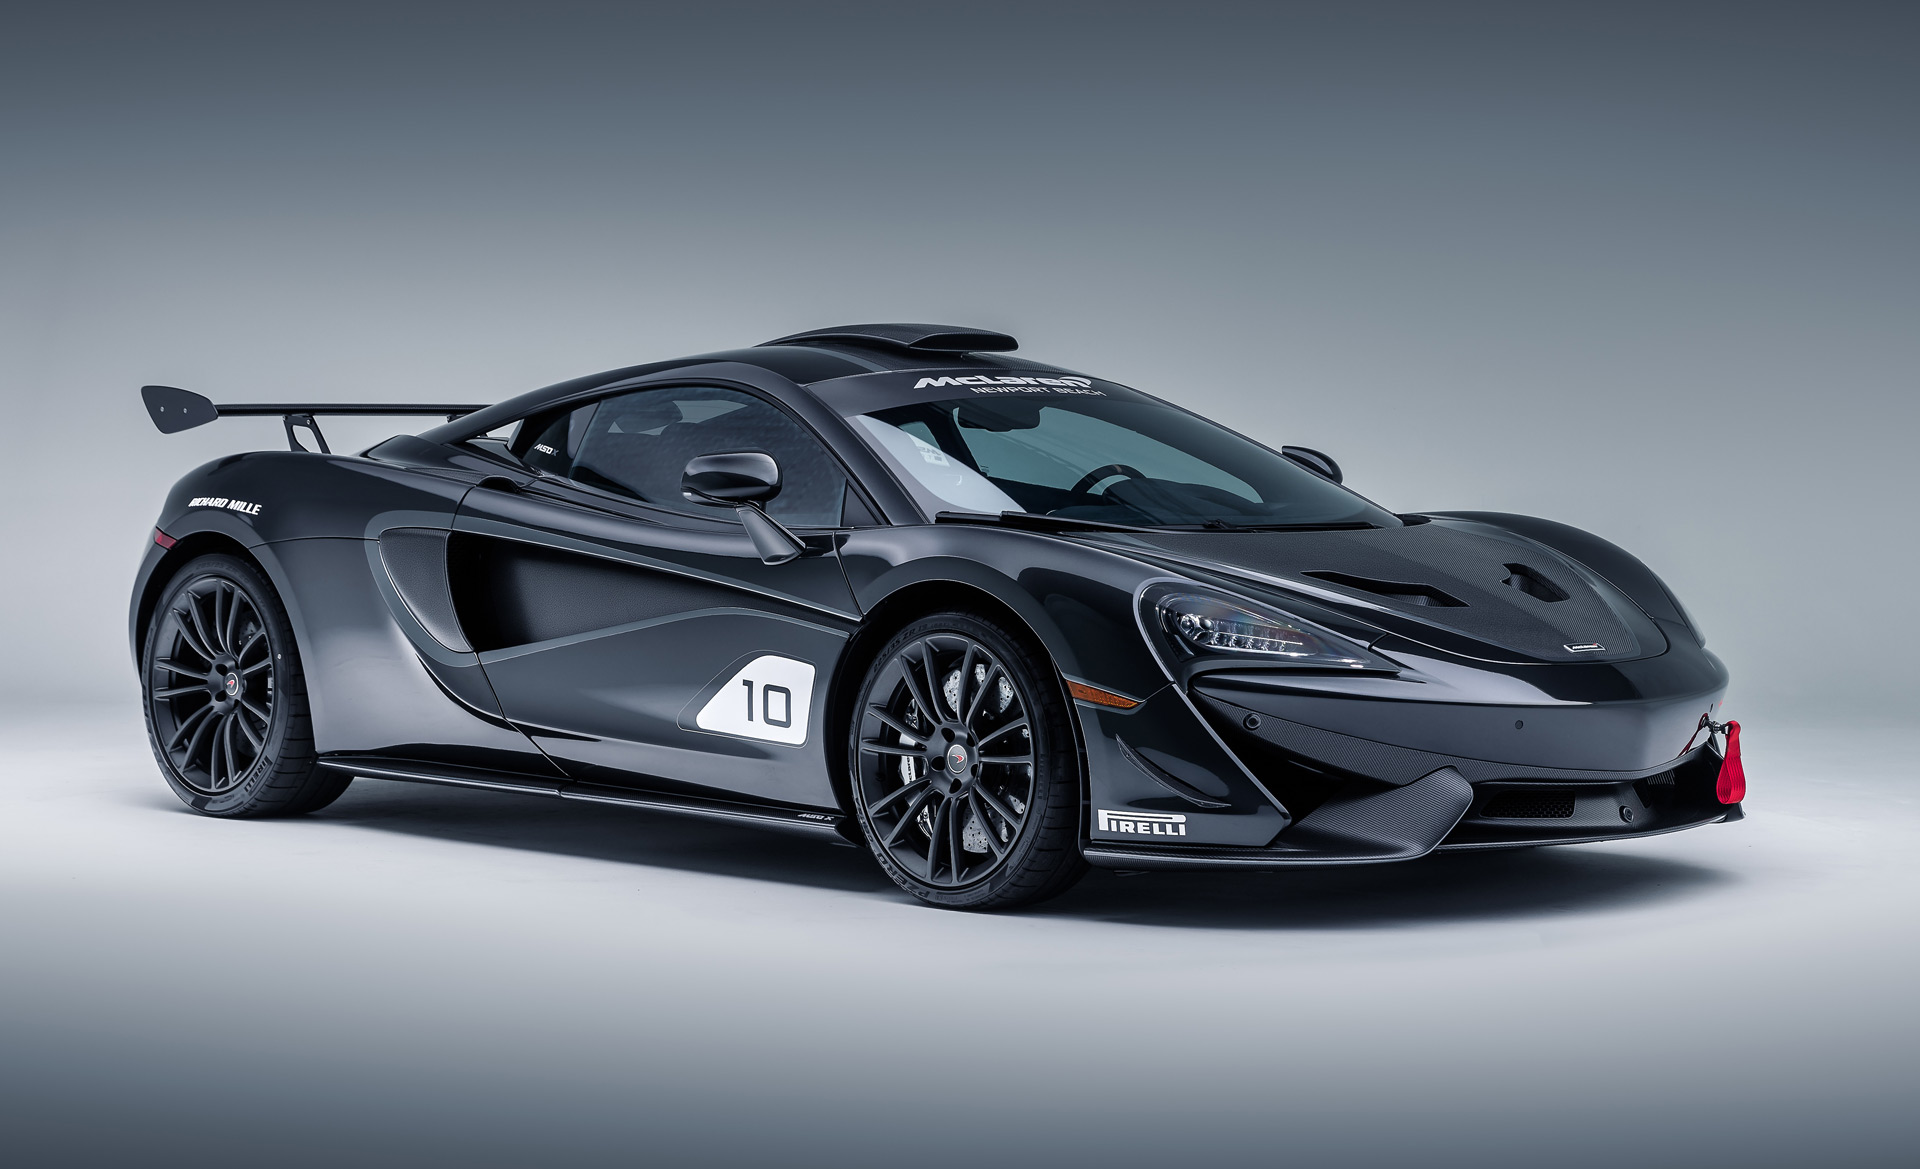 MSO draws on 570S GT4 racer, heritage colors for latest bespoke cars